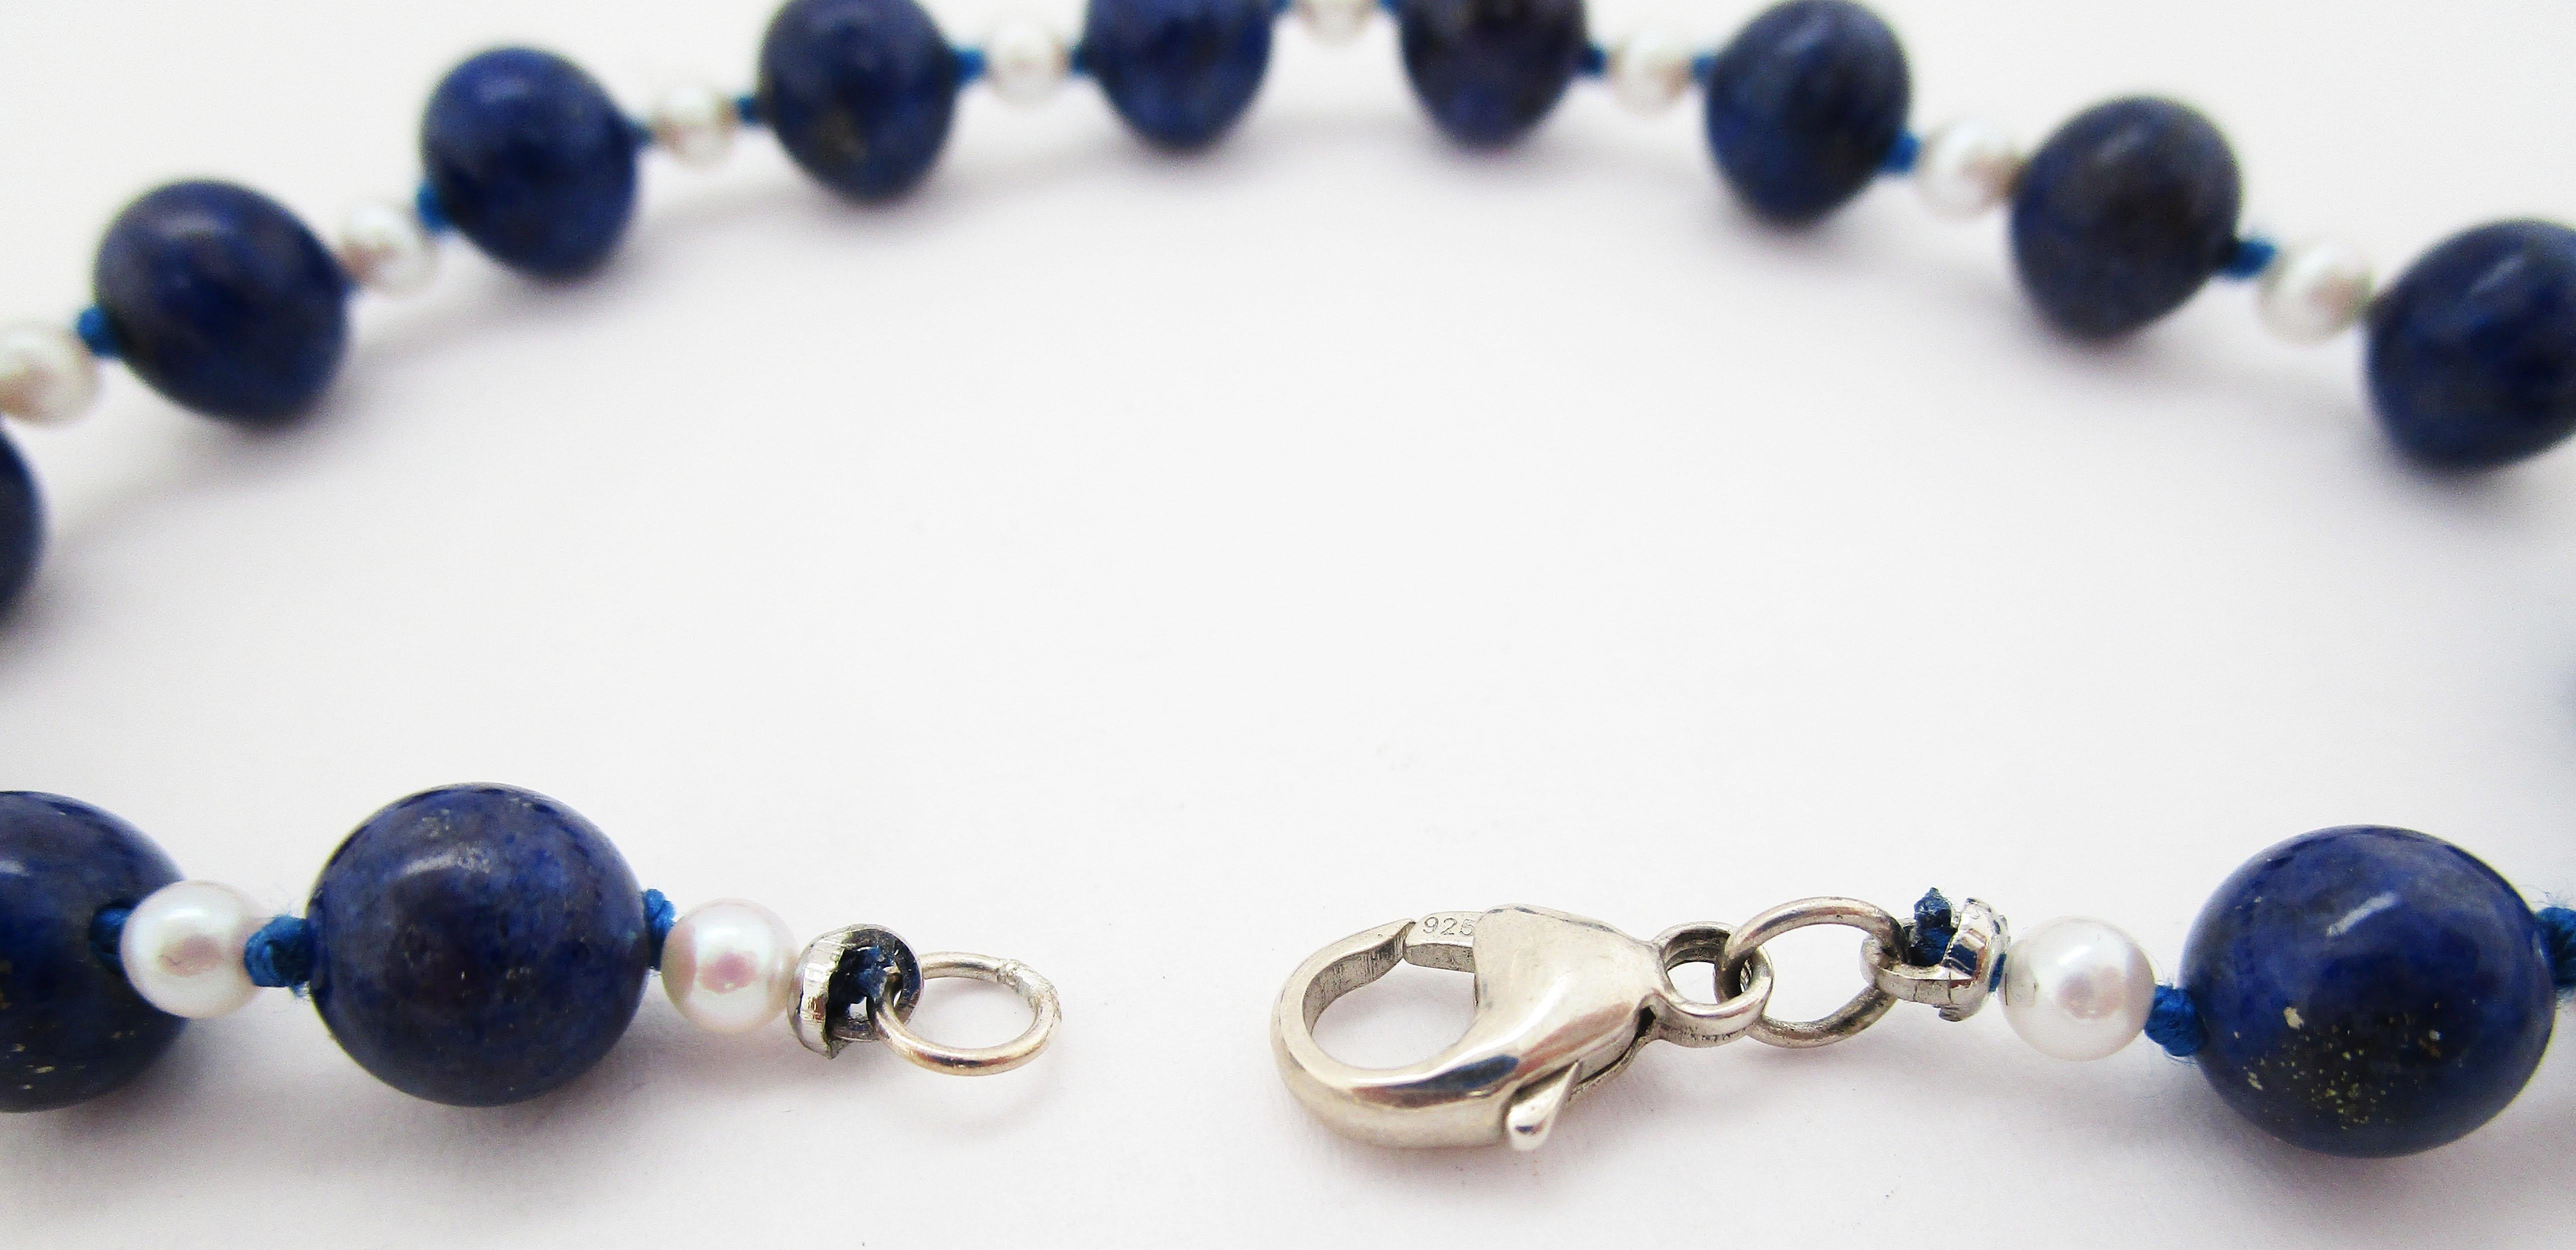 This is a wonderful mid-century lapis and pearl bracelet featuring an alternating pattern of 3mm pearls and 7mm lapis beads. The lapis features rich royal blue tones accented with the subtle flecks of gold characteristic of only the finest lapis!